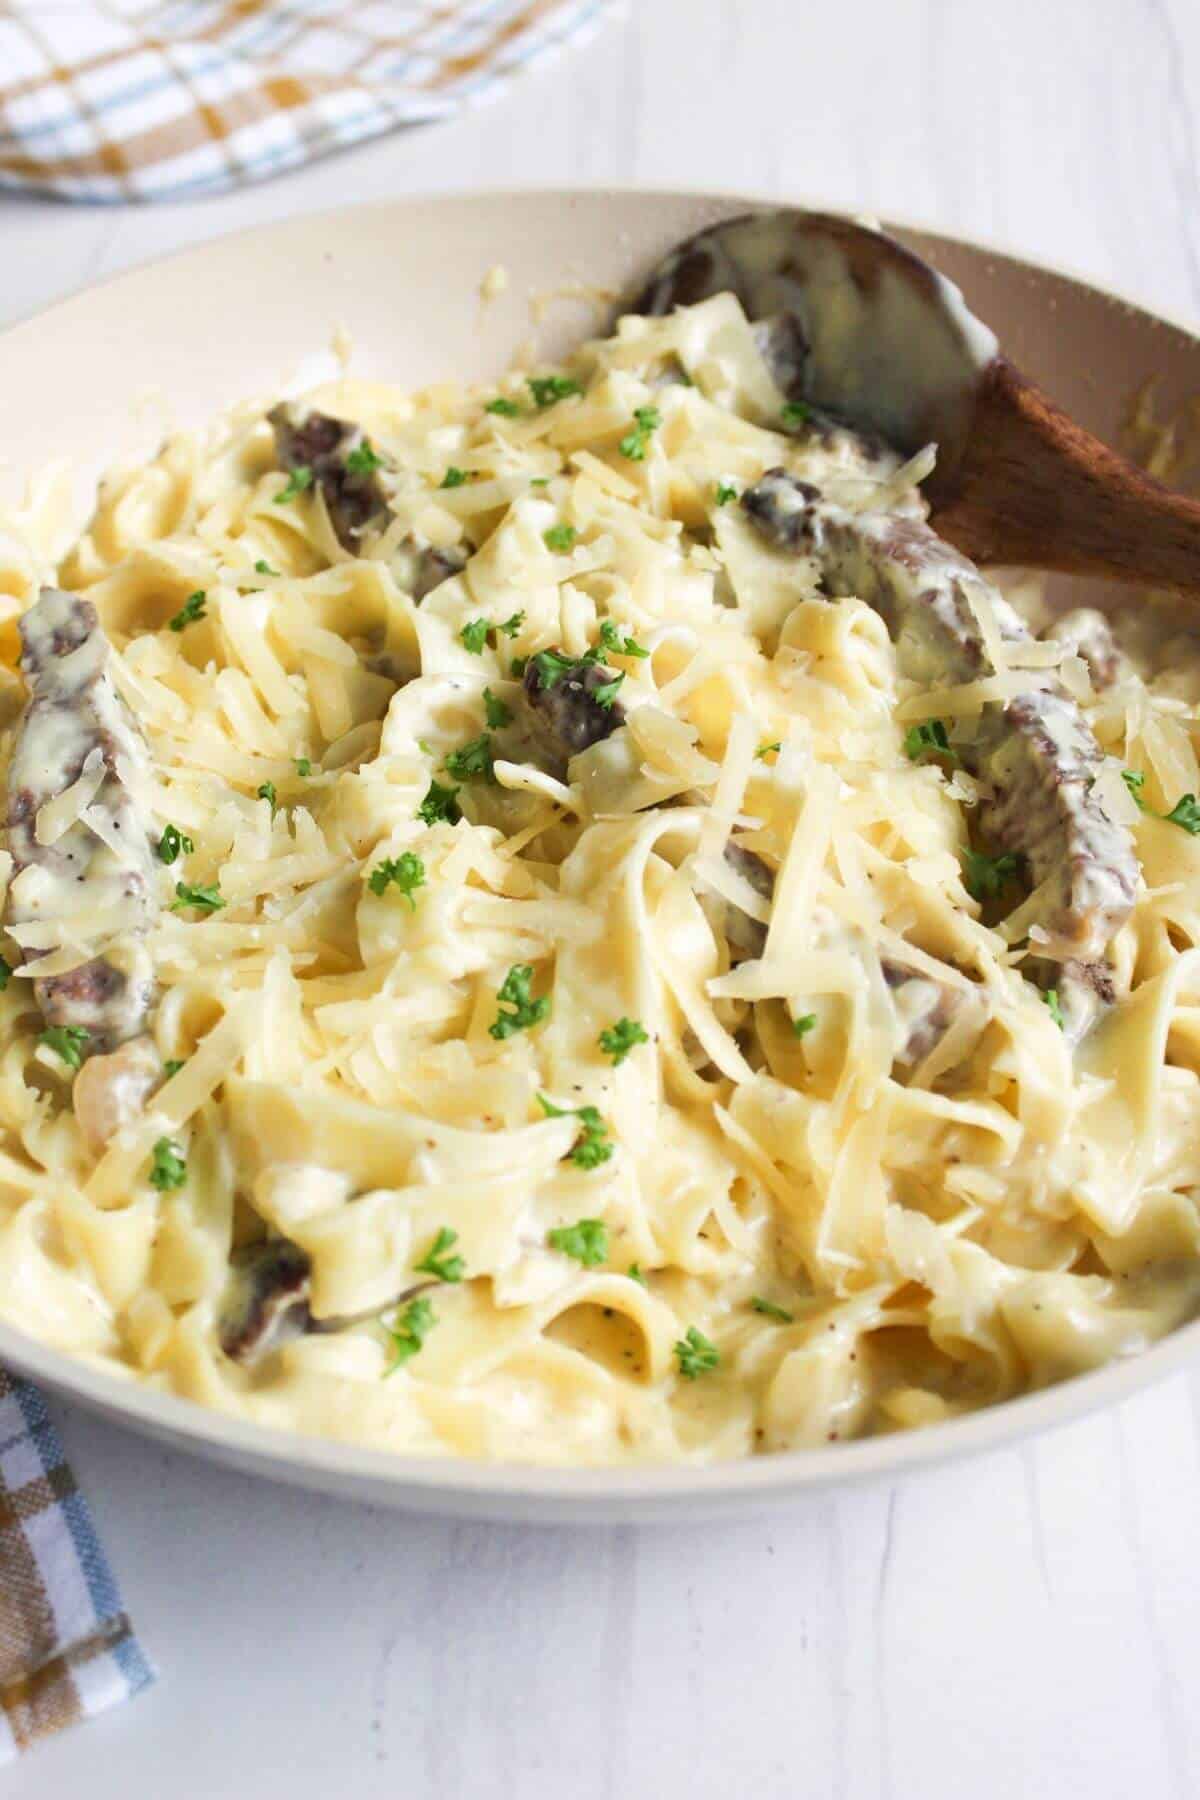 Skillet with pasta and steak in Alfredo sauce.